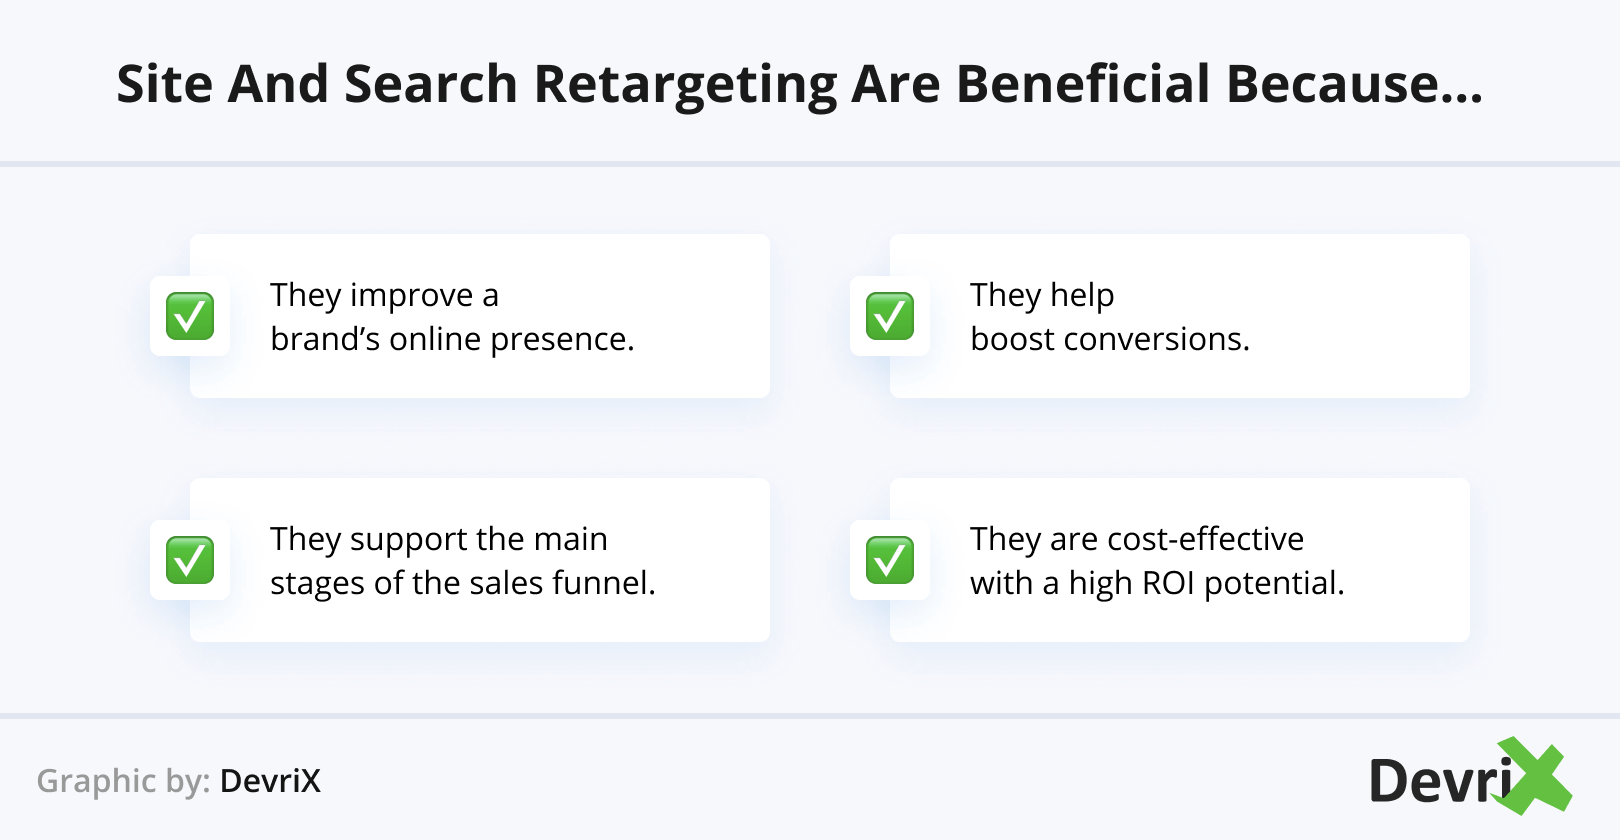 Site and Search Retargeting Are Beneficial Because